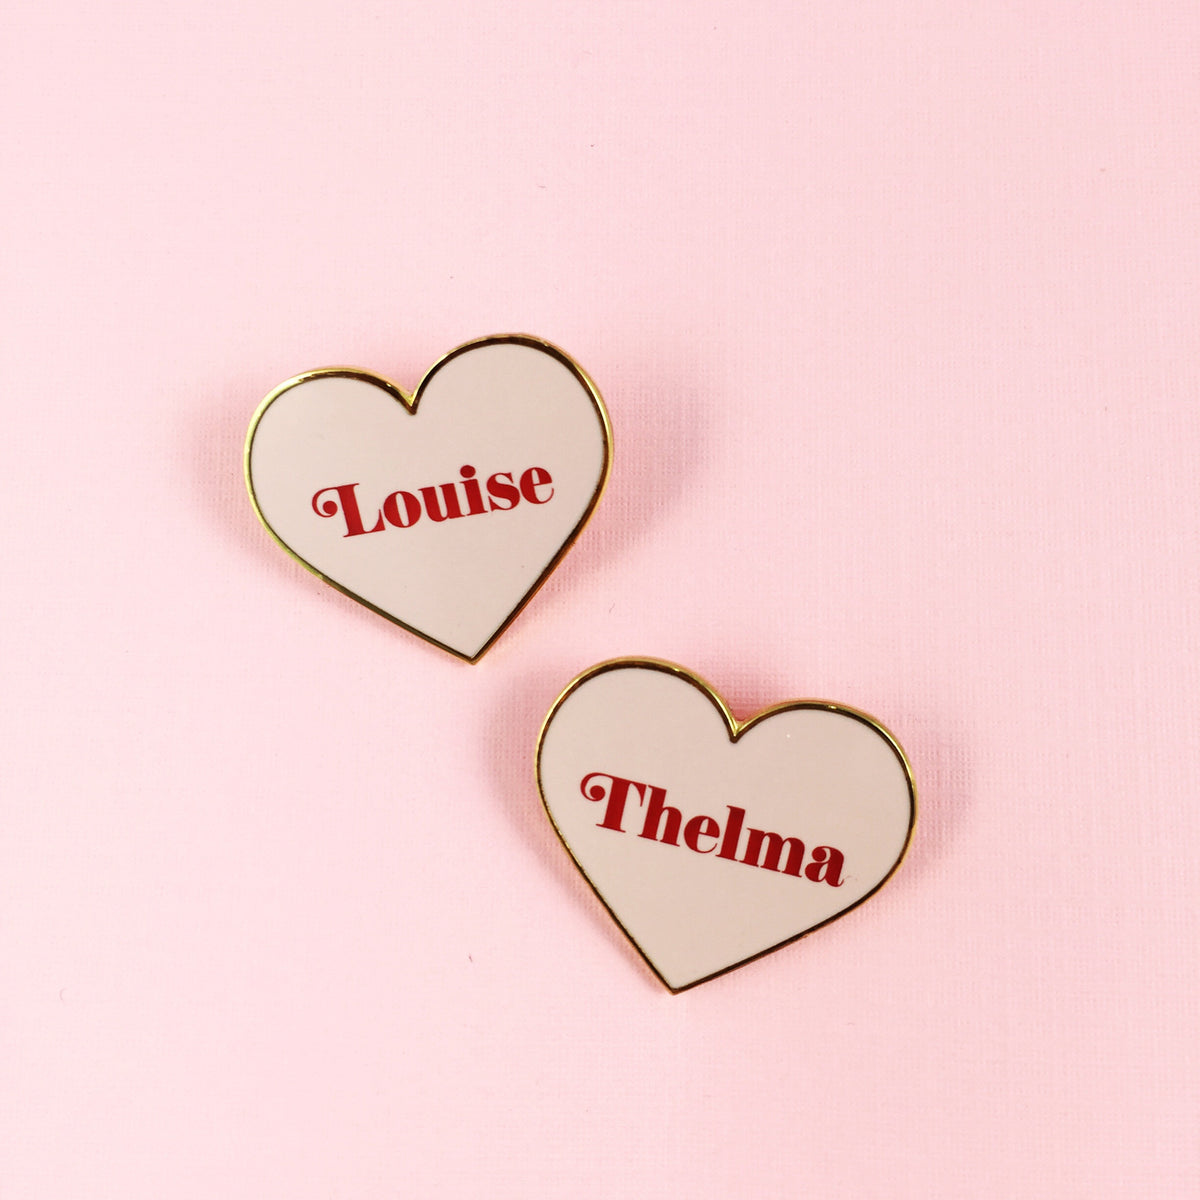 Buy Thelma Louise Key Chain Set, Partners in Crime, Best Friend